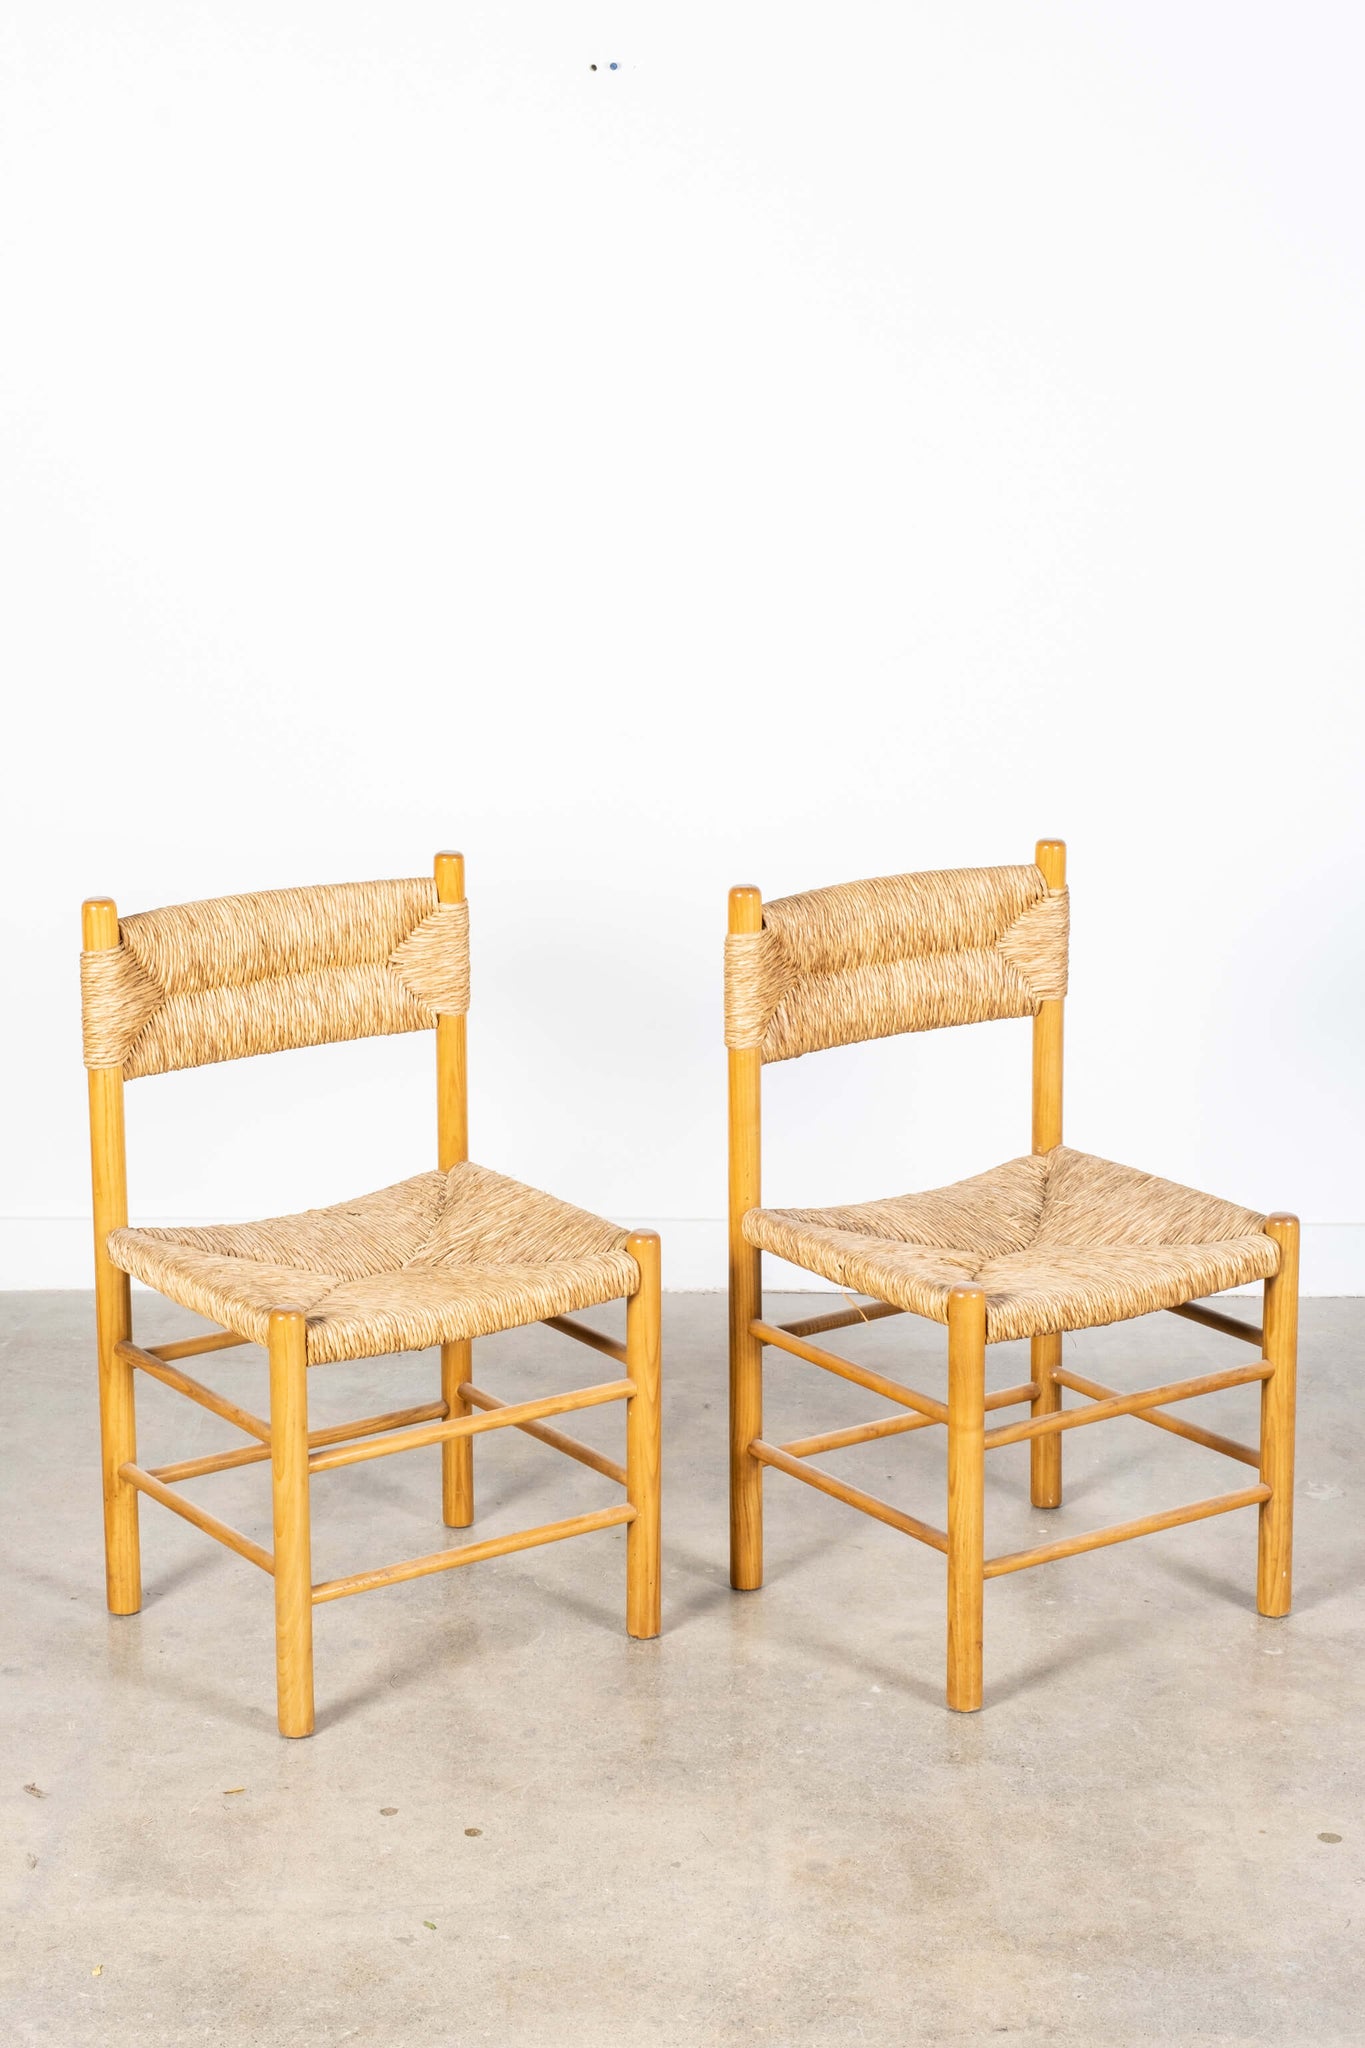 Rare Vintage Dordogne French Dining Chairs with Wood Frame & Woven Jute Seat, shown side by side